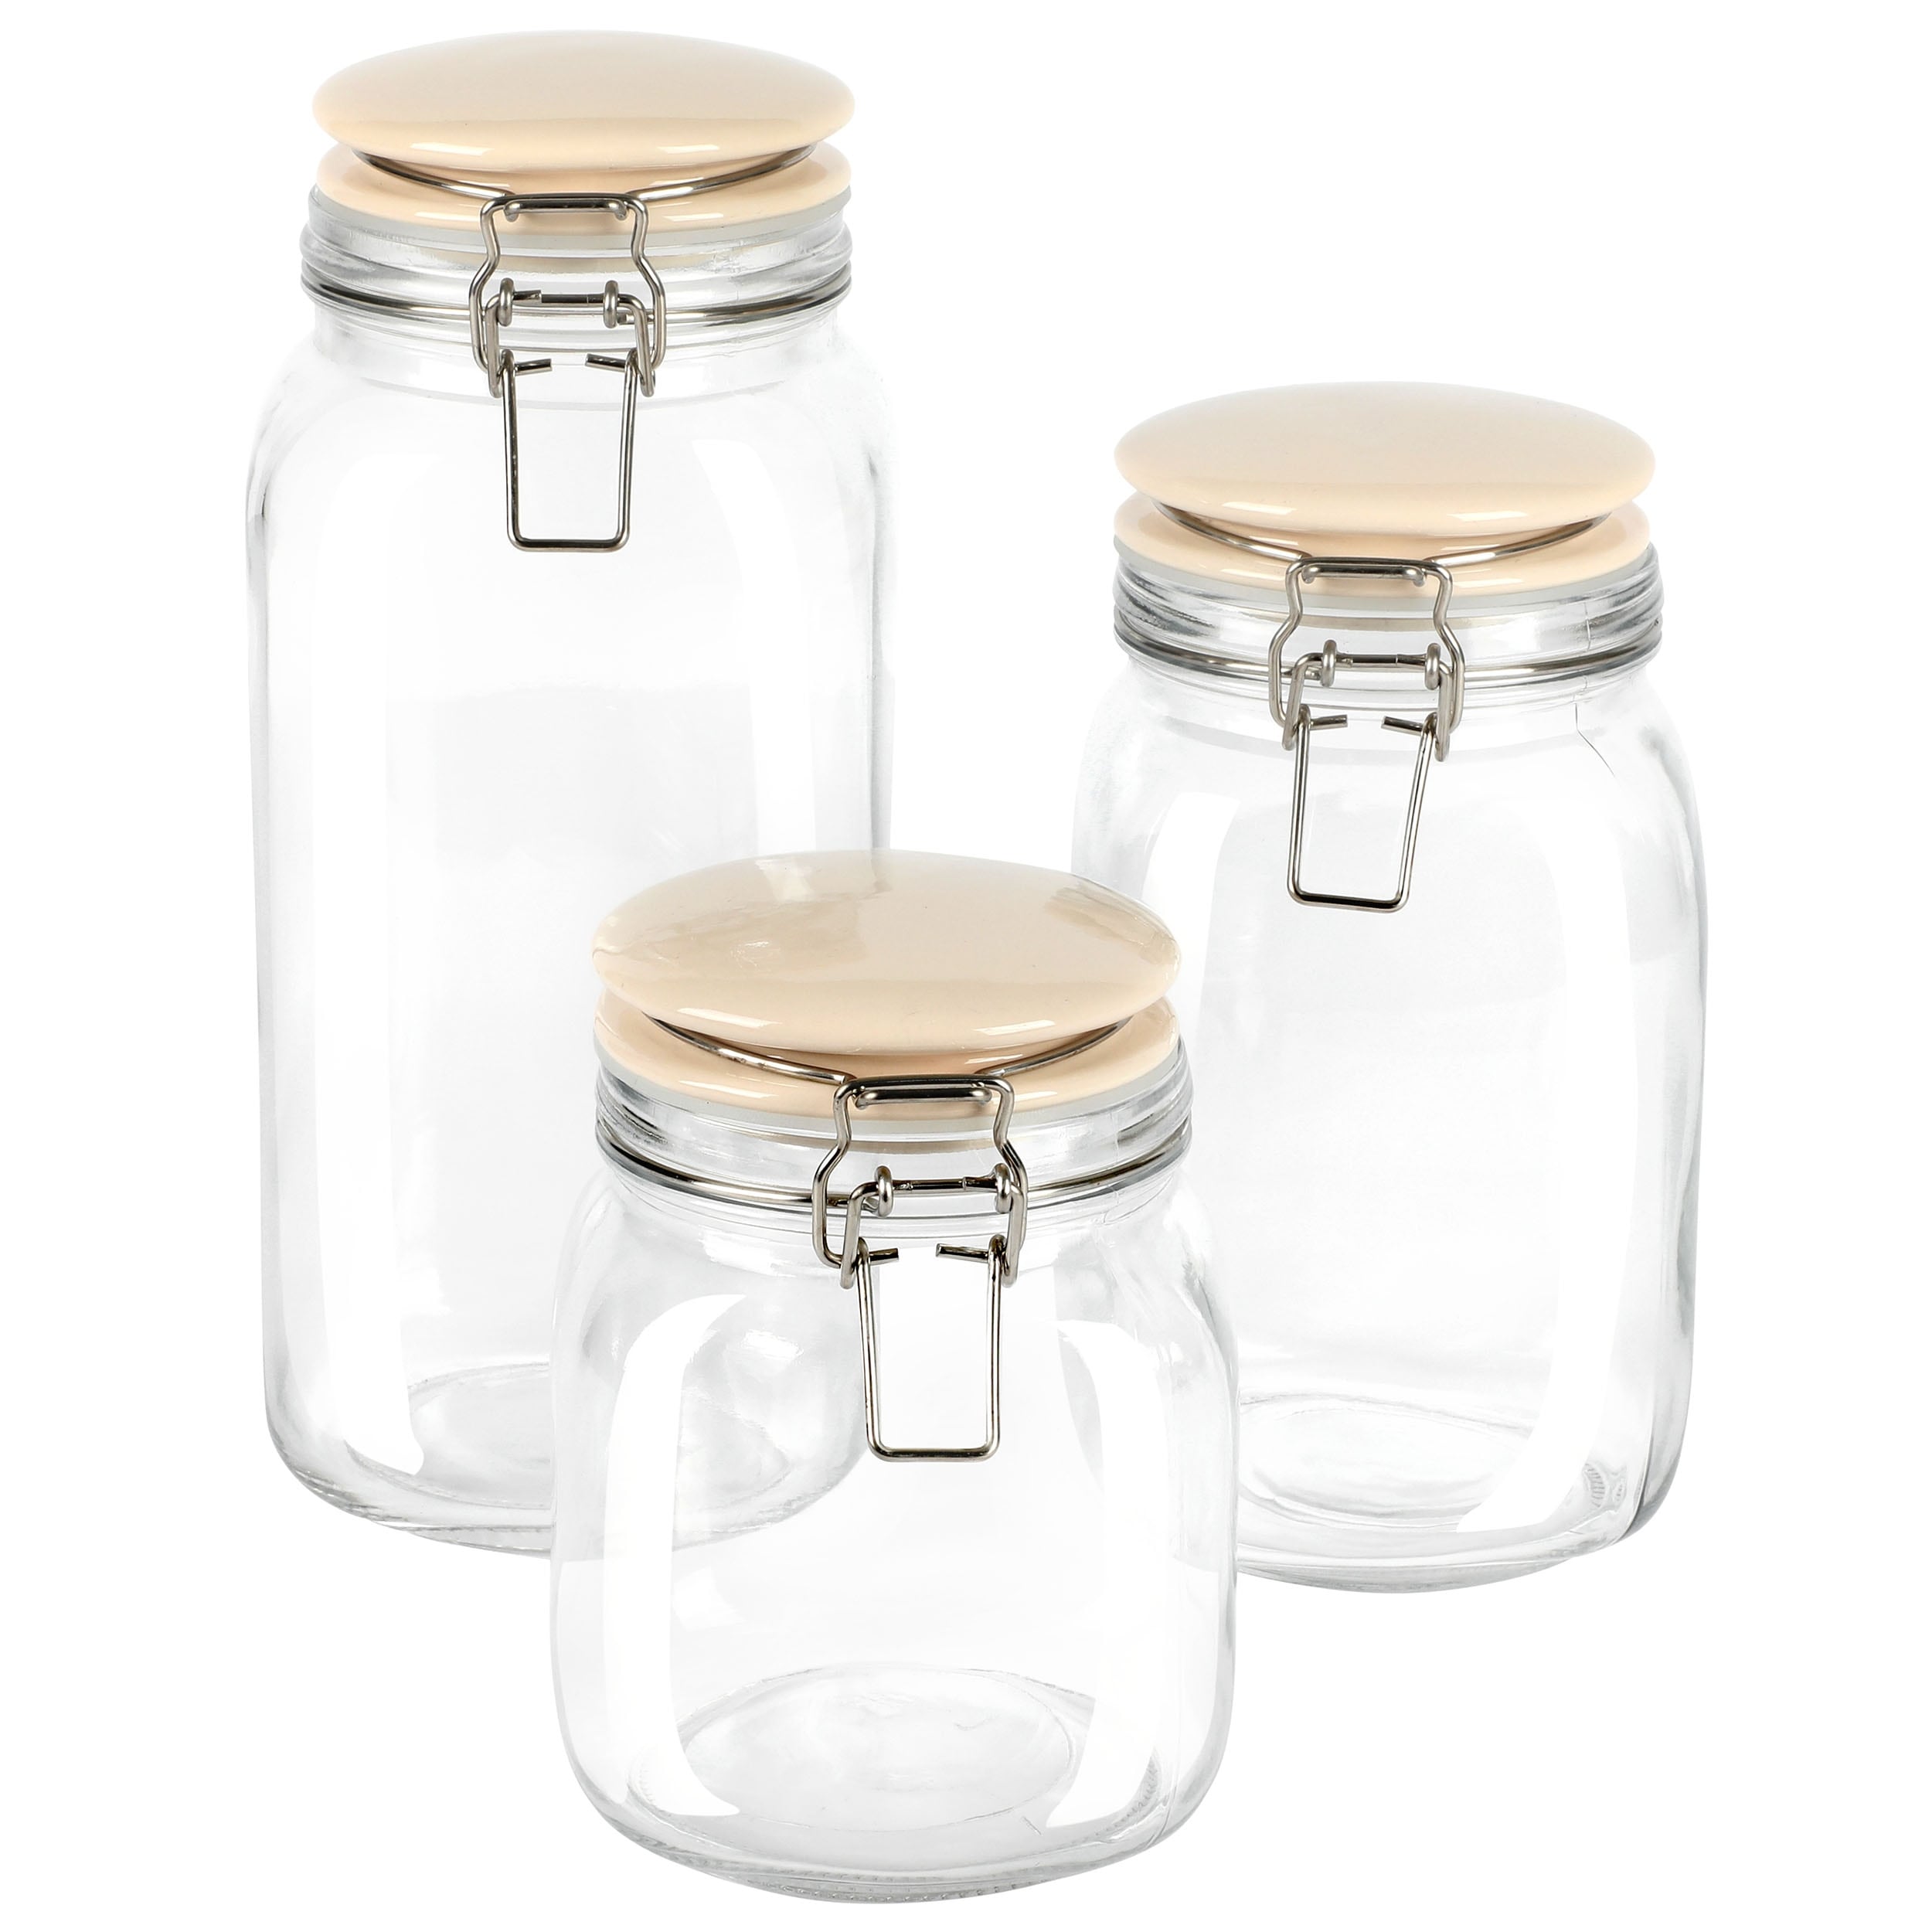 https://ak1.ostkcdn.com/images/products/is/images/direct/601bb1a8c3654d43952ba671d6e34ab8691996bb/Martha-Stewart-Rindleton-3-Piece-Glass-Canister-Set-in-Off-White.jpg